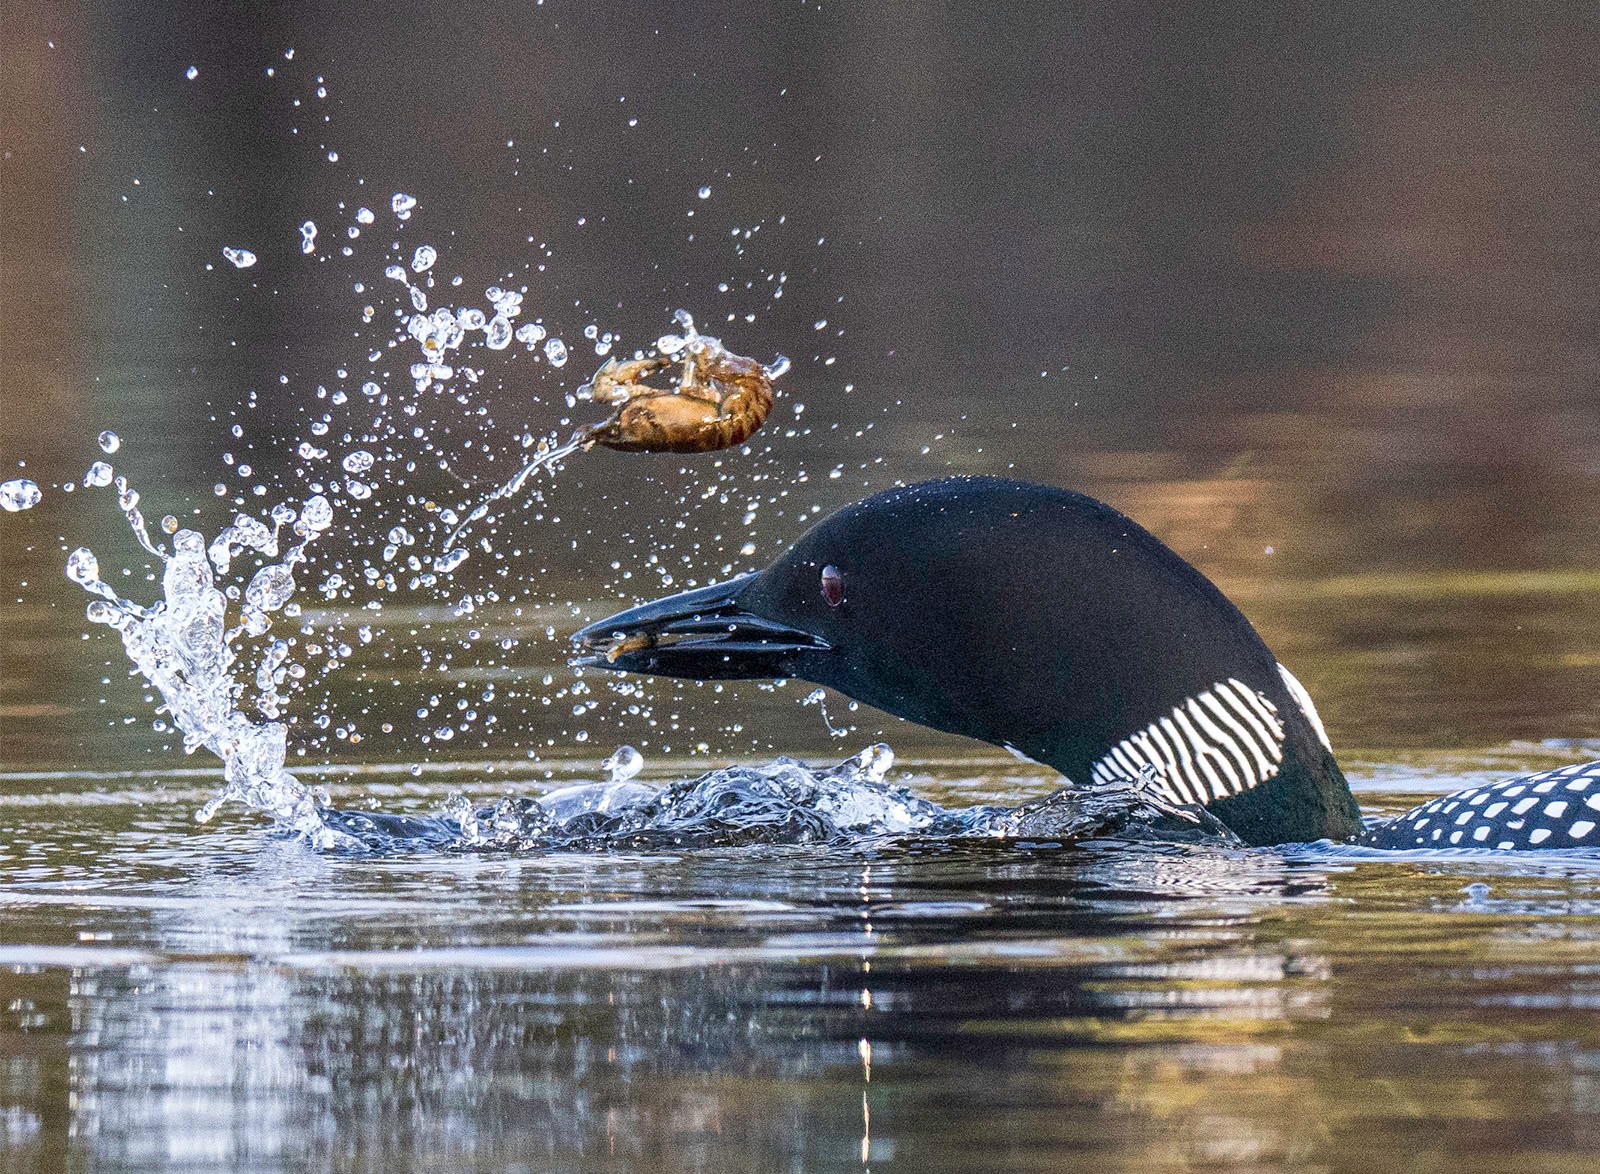 A loon with striking black and white plumage catches a fish, causing splashes in the calm water.